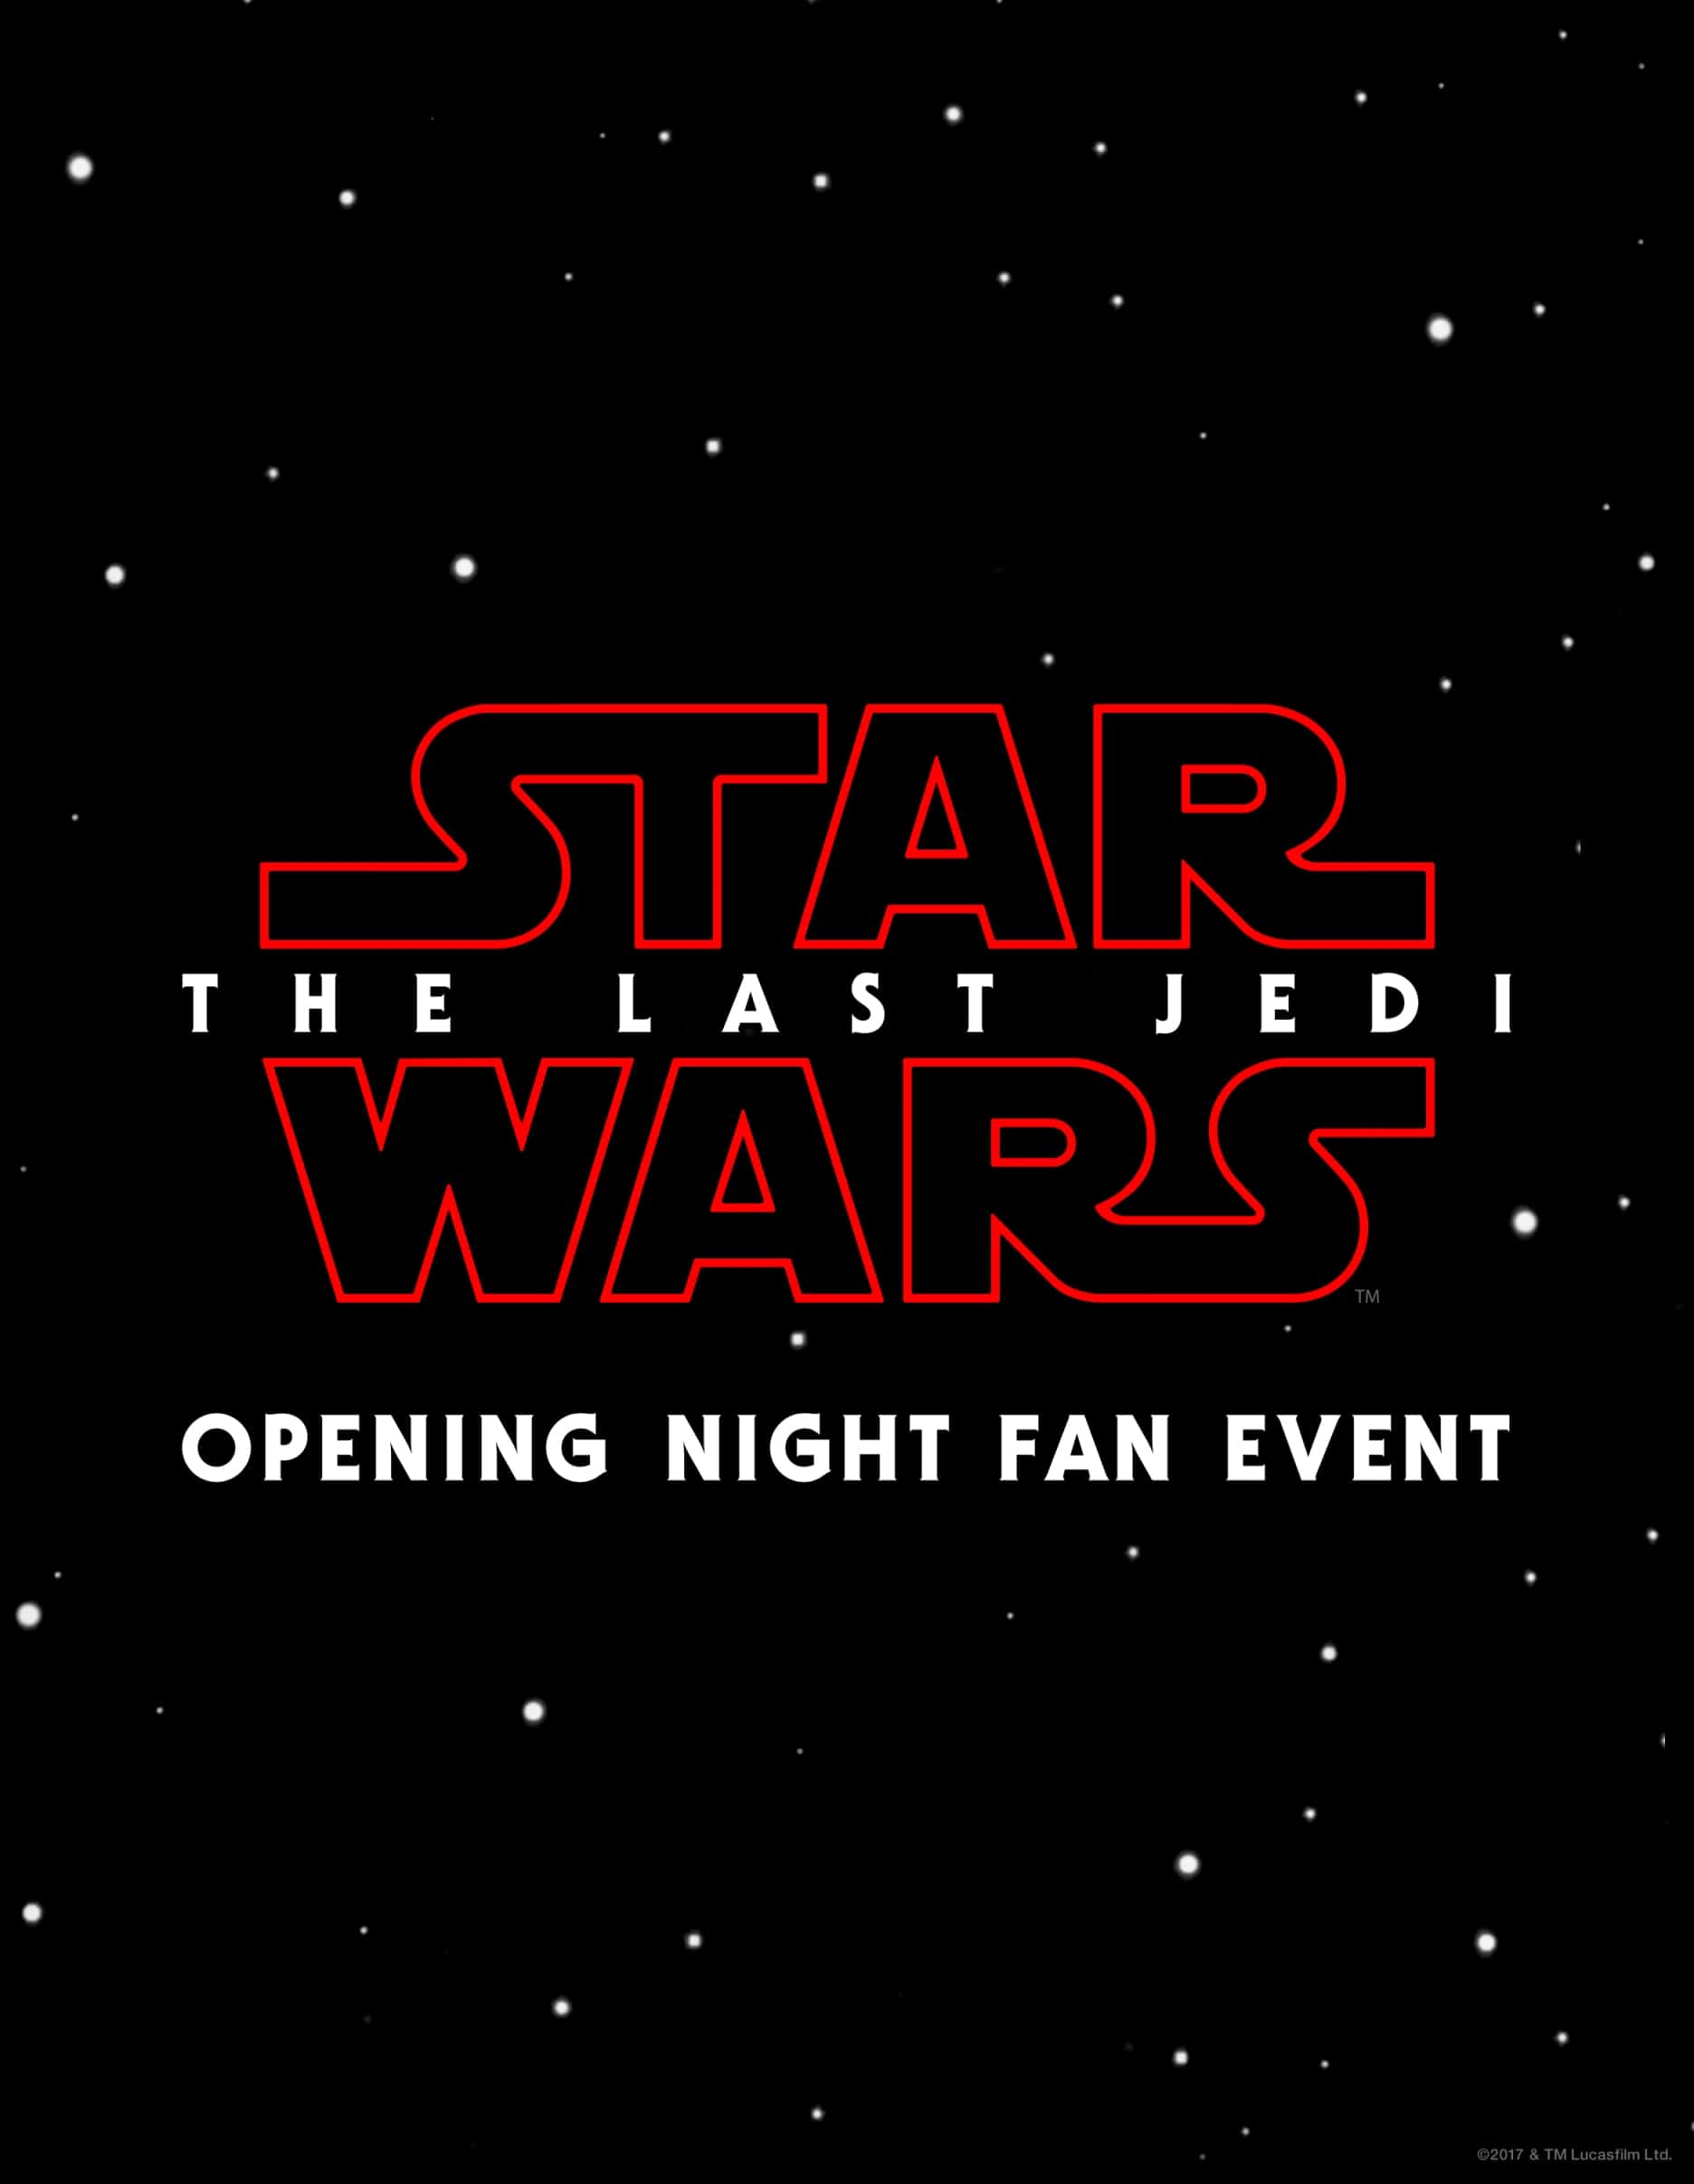 Star Wars The Last Jedi Opening Night Event Emax Emagine